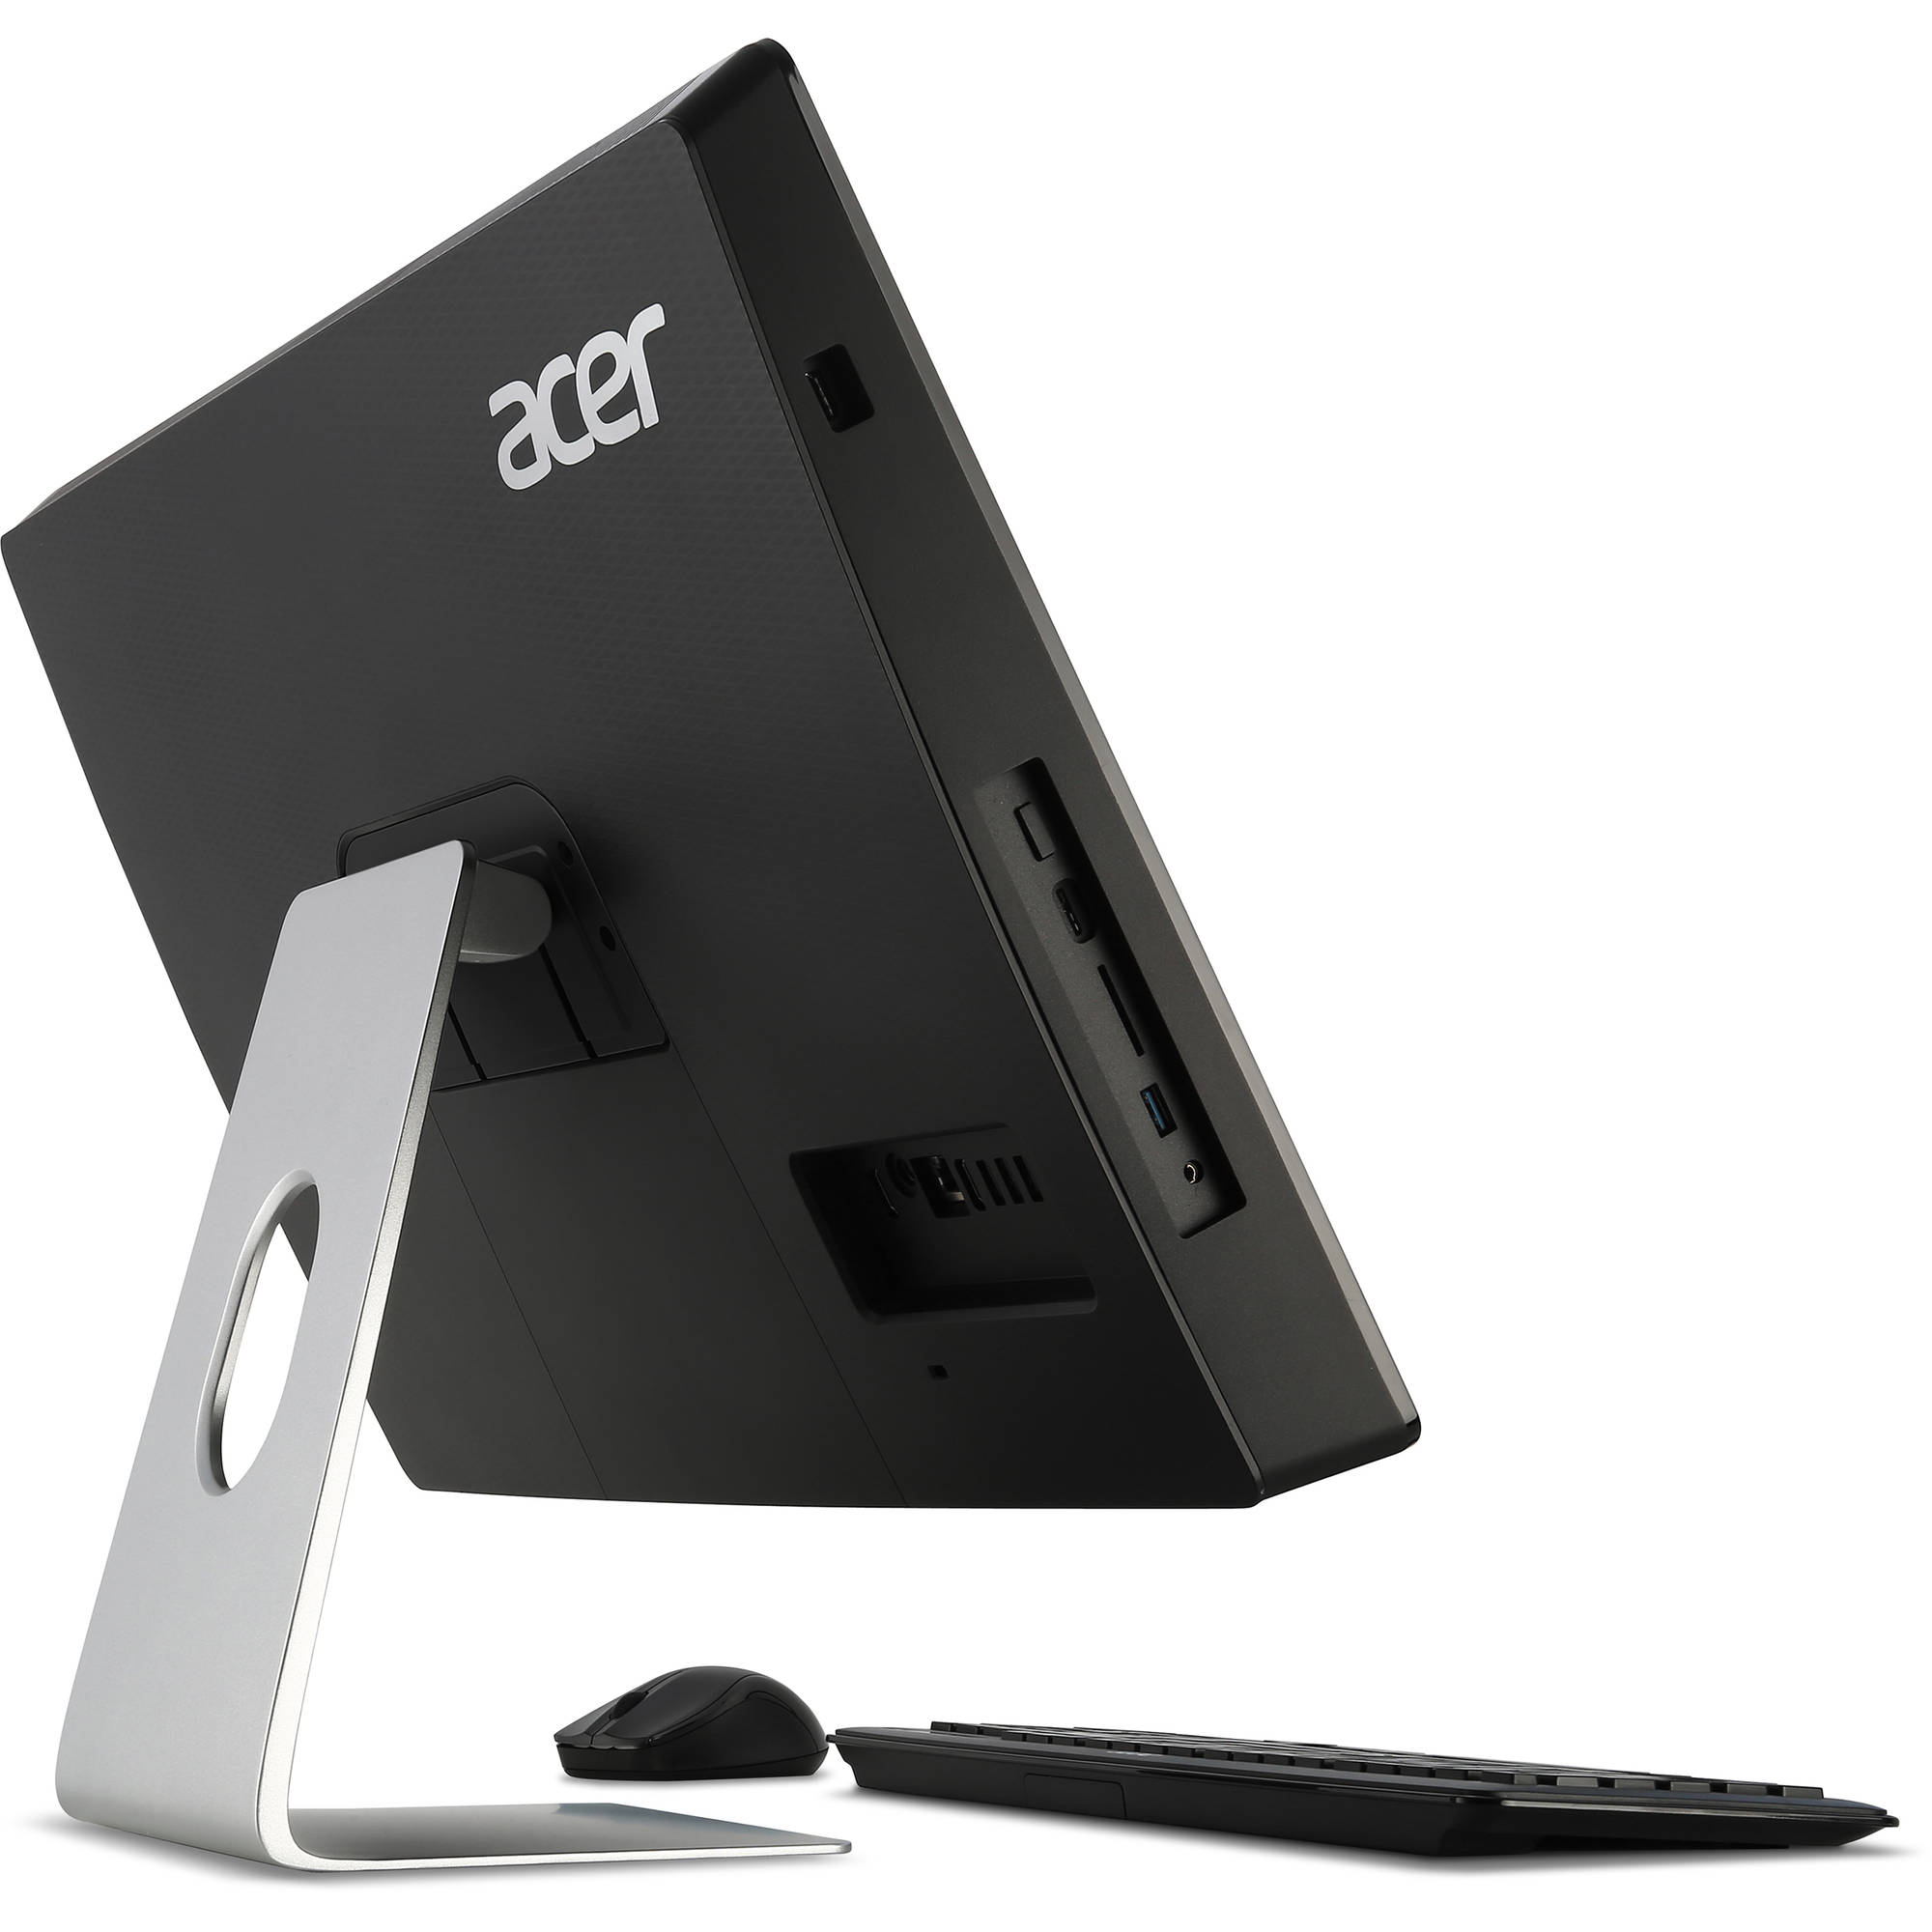 Acer Aspire Z3 Az3 615 Ur11 23 All In One Dq Svaaa 002